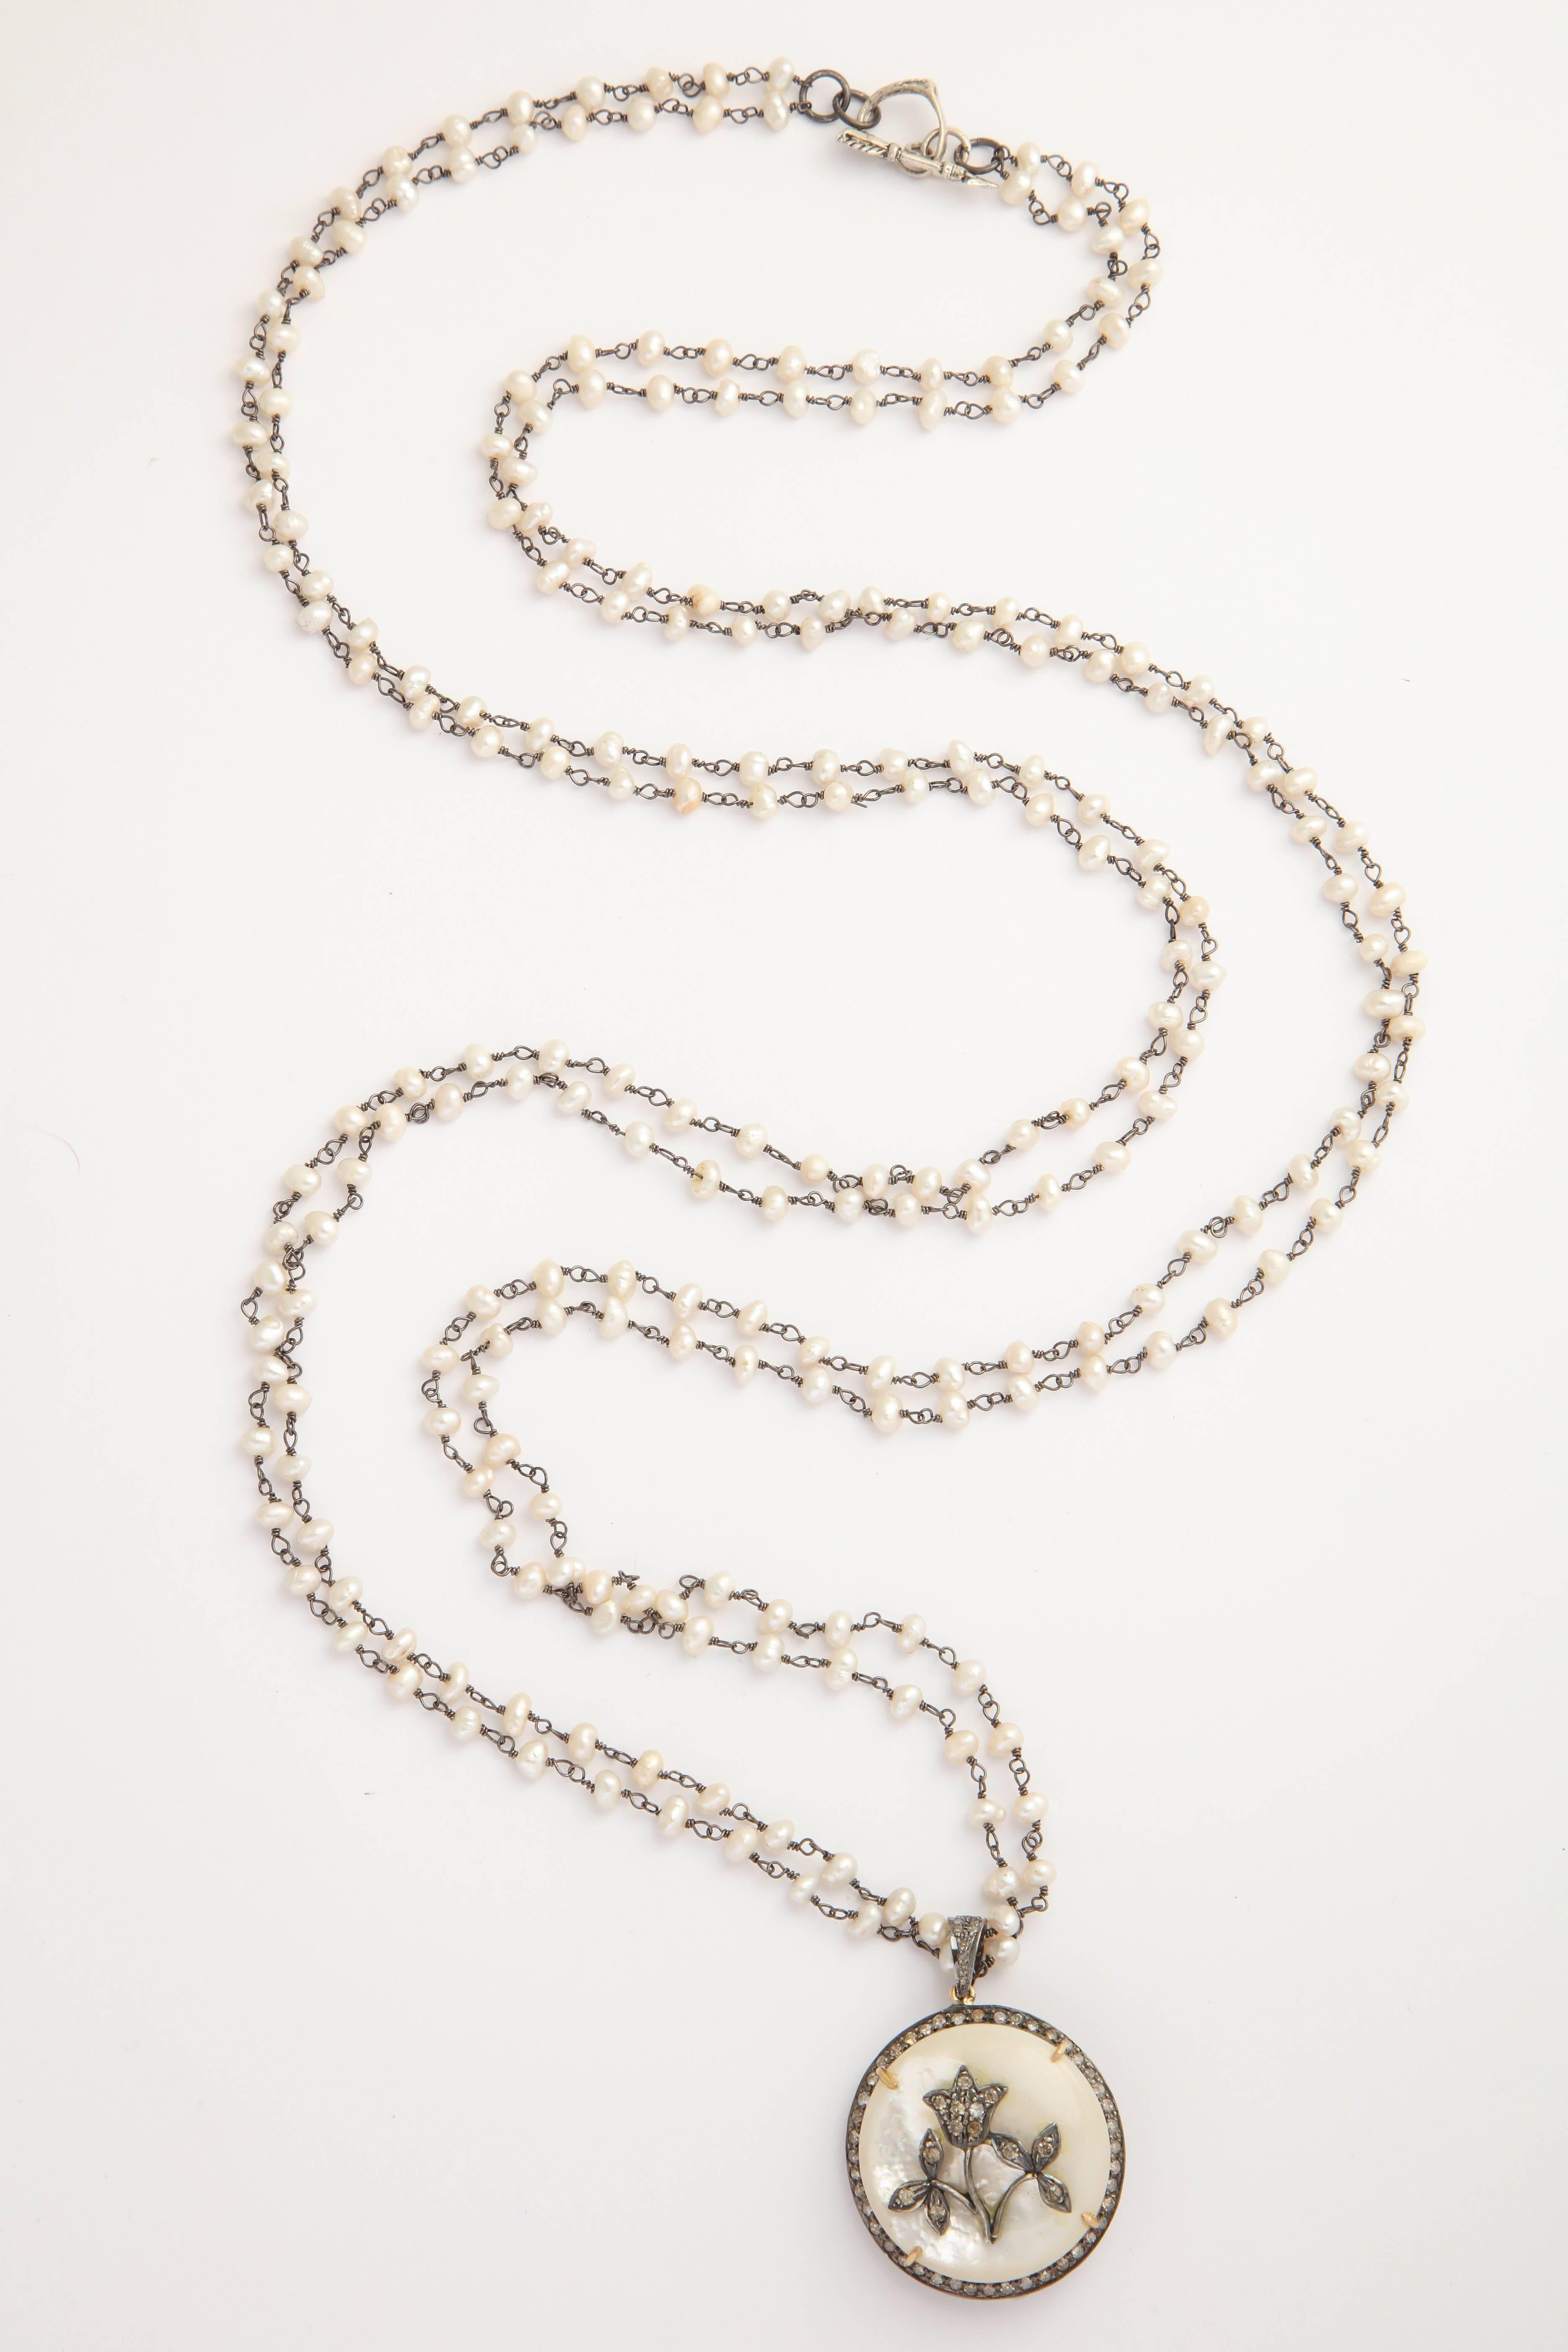 This elegant and stylish necklace is two strands of 40 inch freshwater pearl chain.  The pendant is a large dome of Mother of Pearl surrounded by diamonds with a silver and diamond floral center. It can be worn twice around the neck and settle at